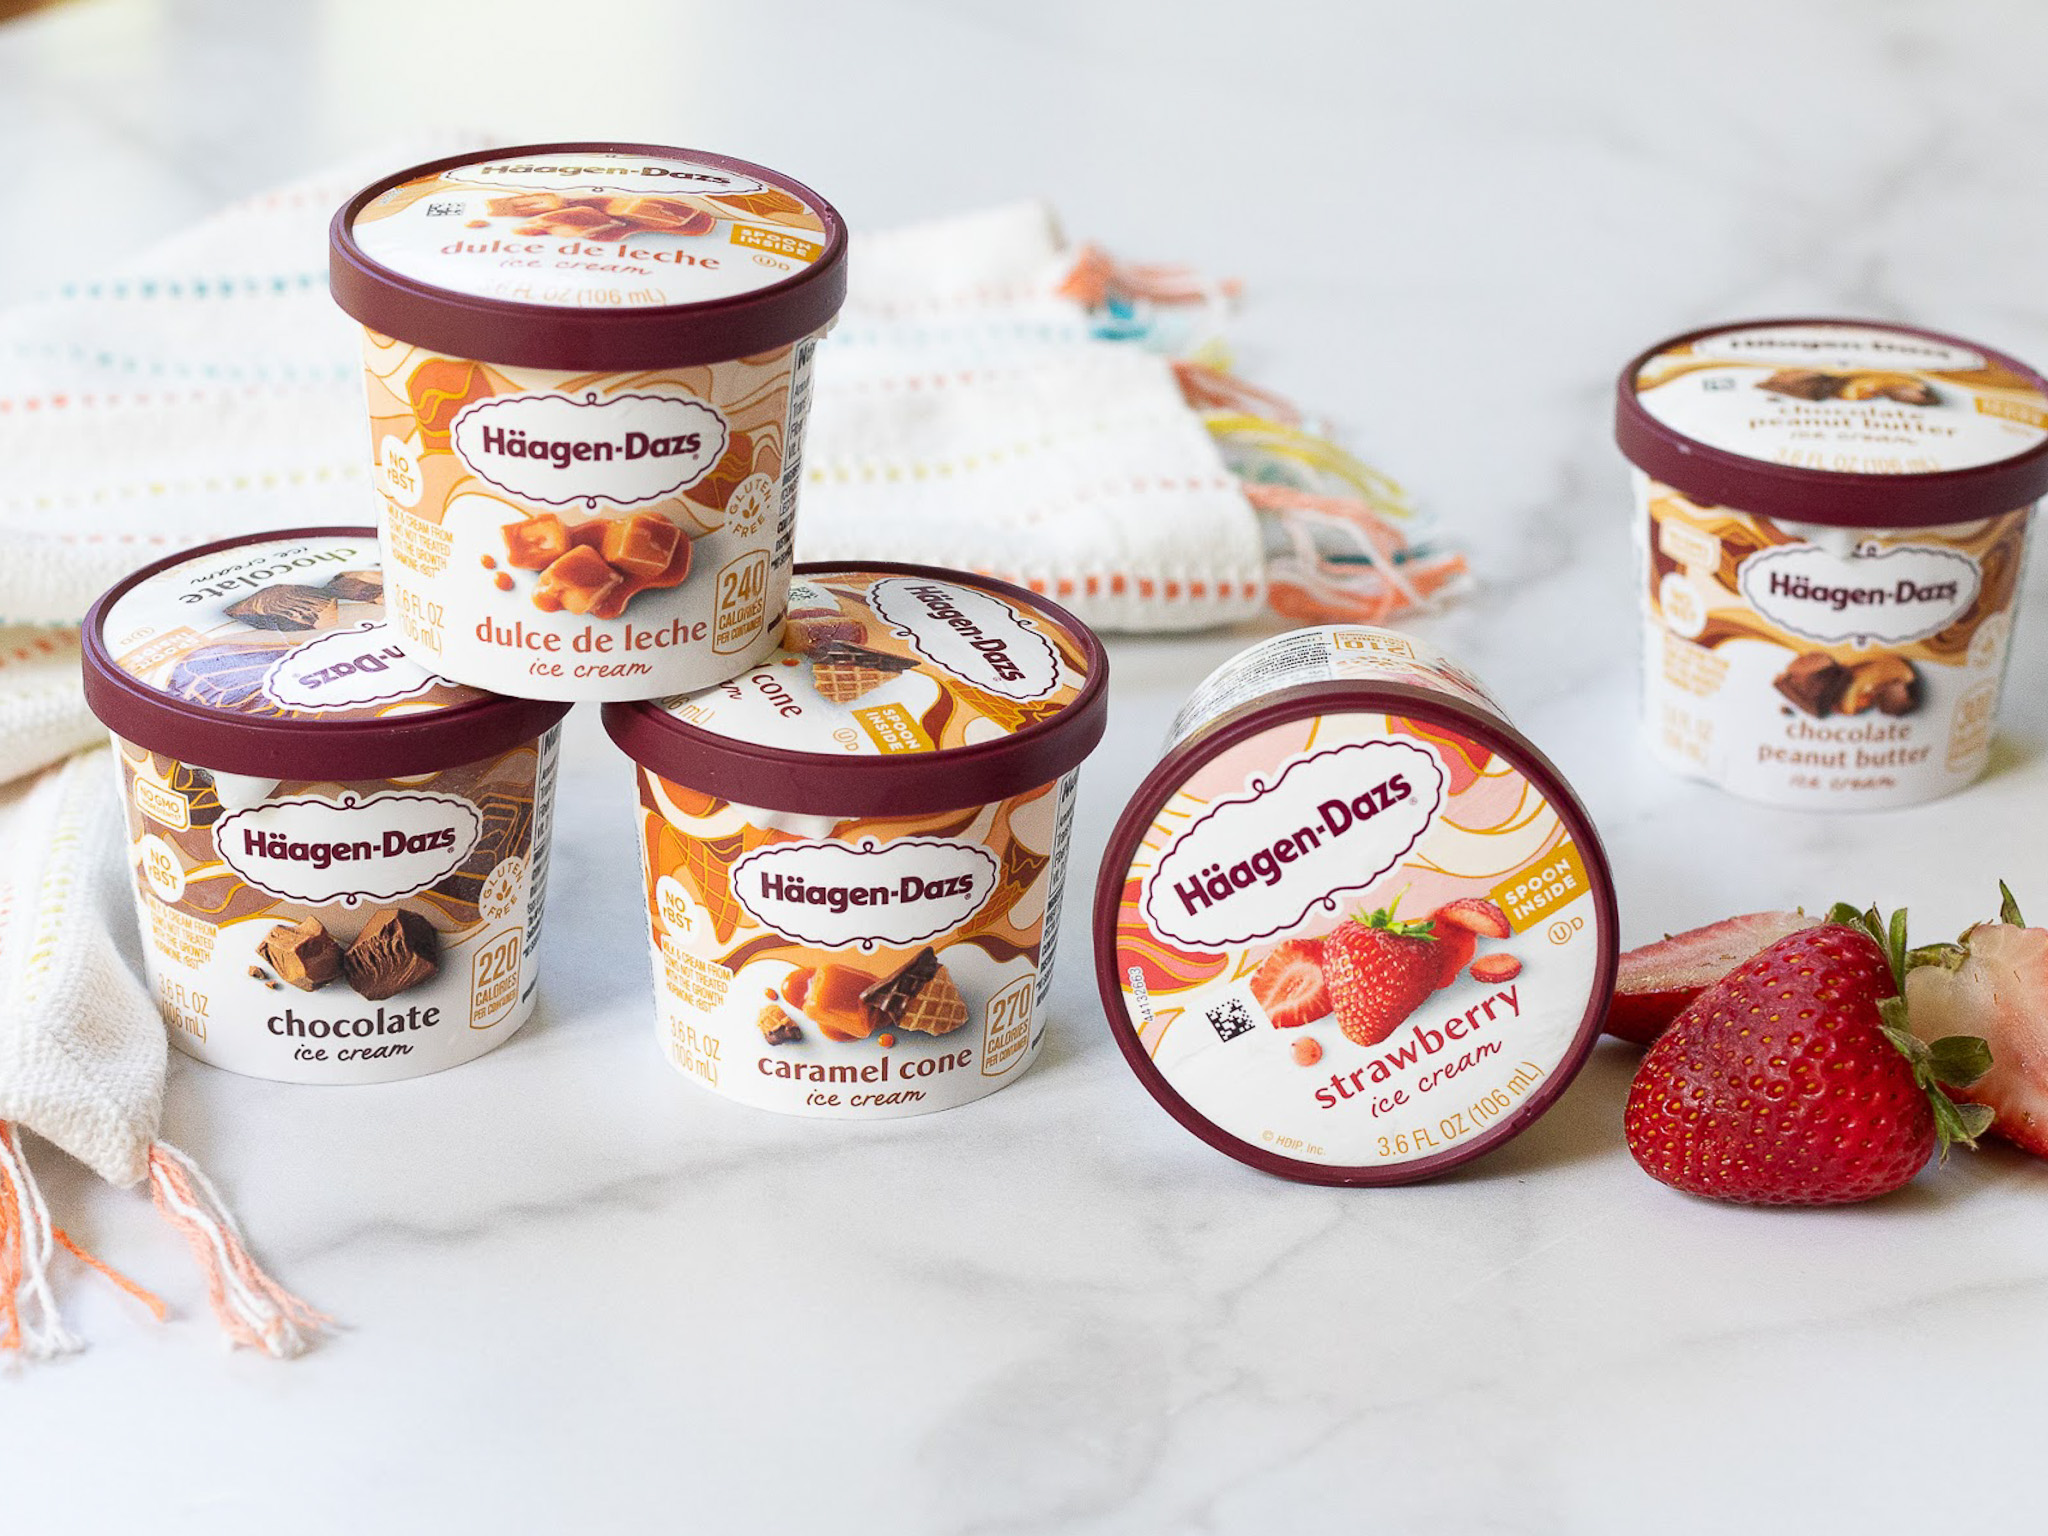 Add Luxury To Your Cart – Häagen-Dazs Mini Cups Are On Sale At Publix